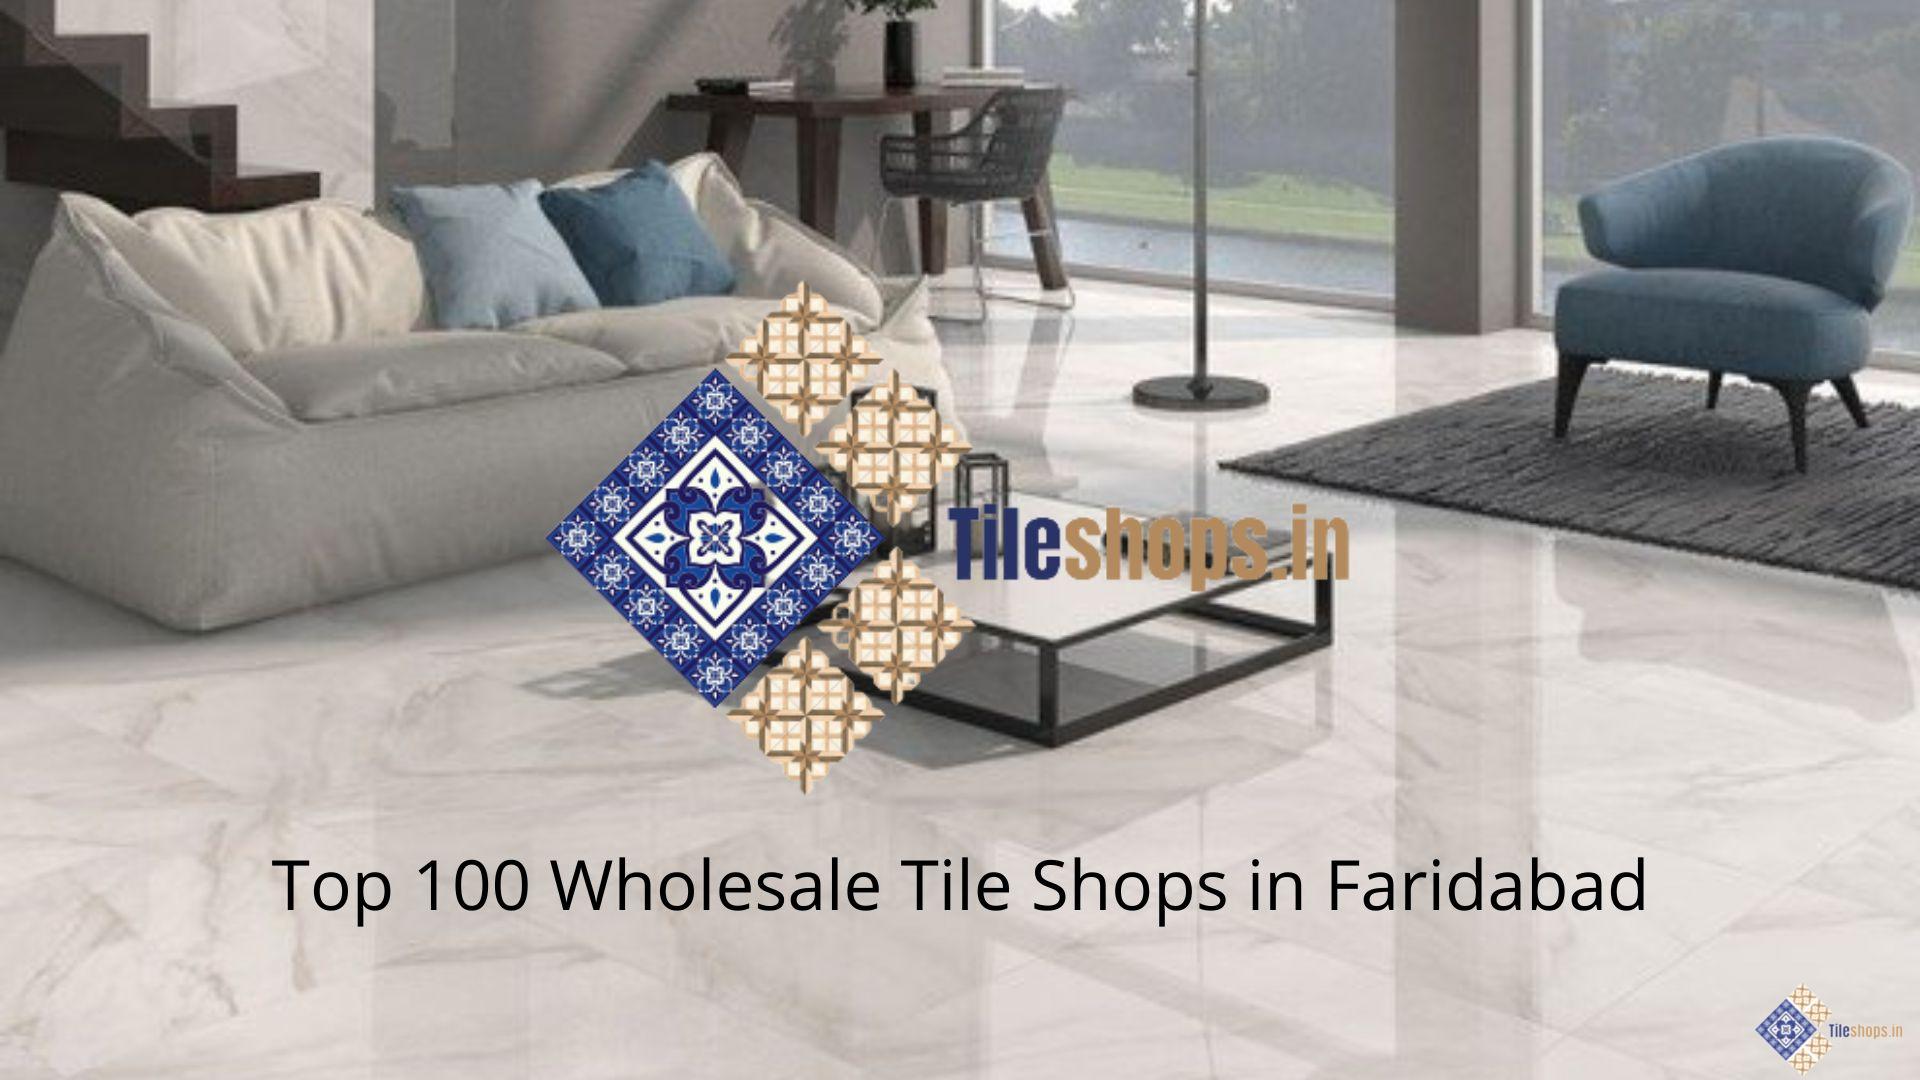 Top 100 Wholesale Tile Shops in Faridabad